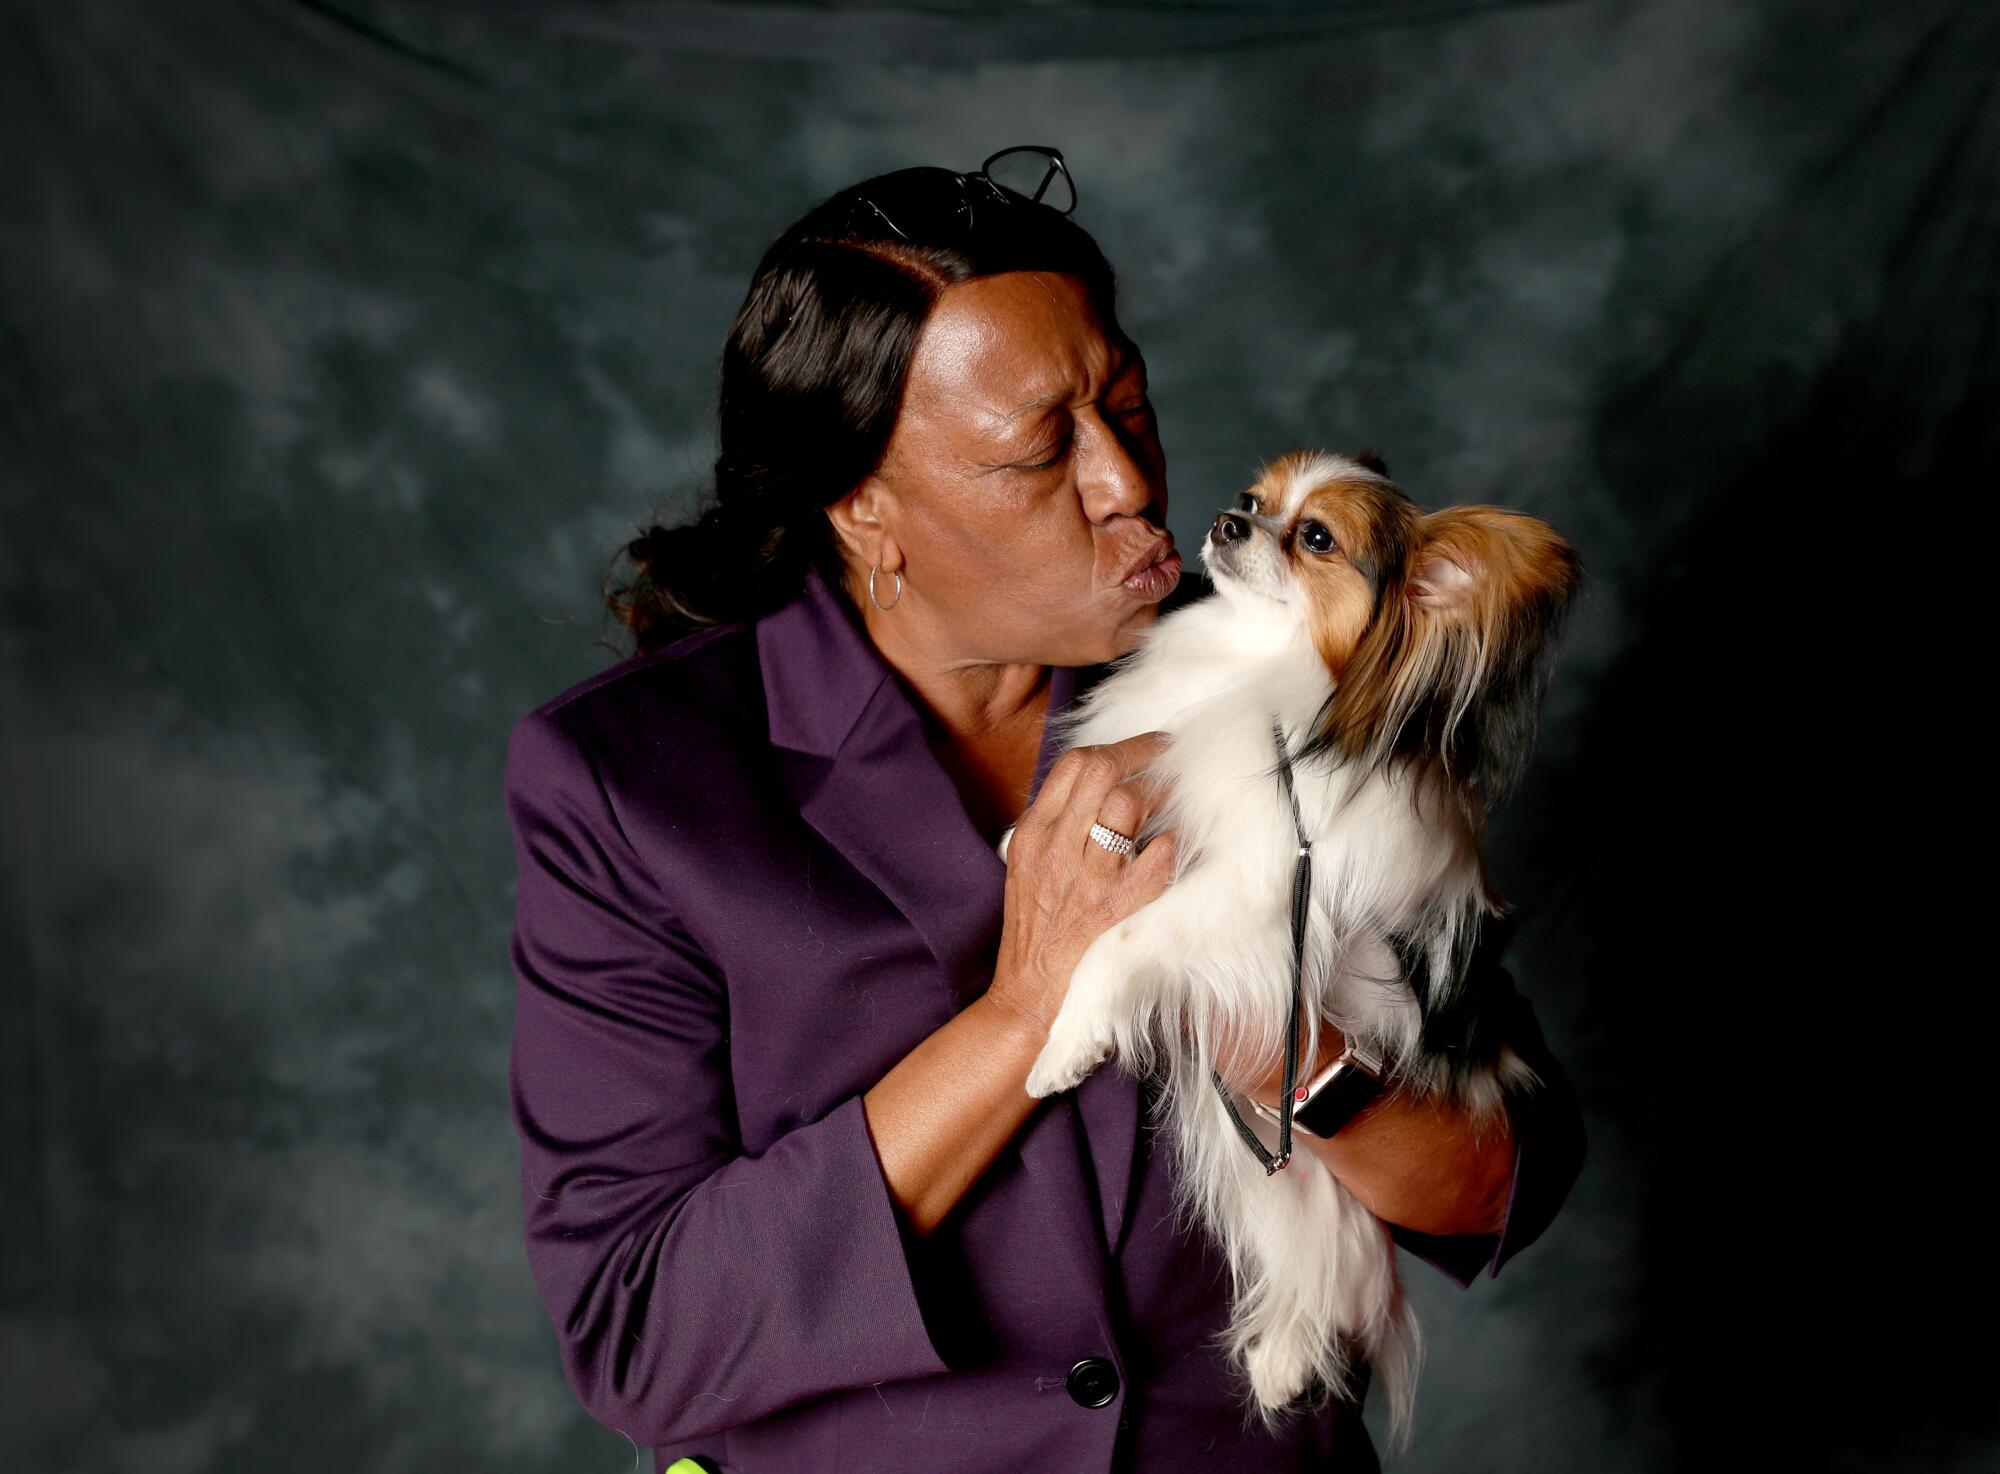 Staci Thompson, 61, of Long Beach, poses with Ari, a 13-month-old papillon. 